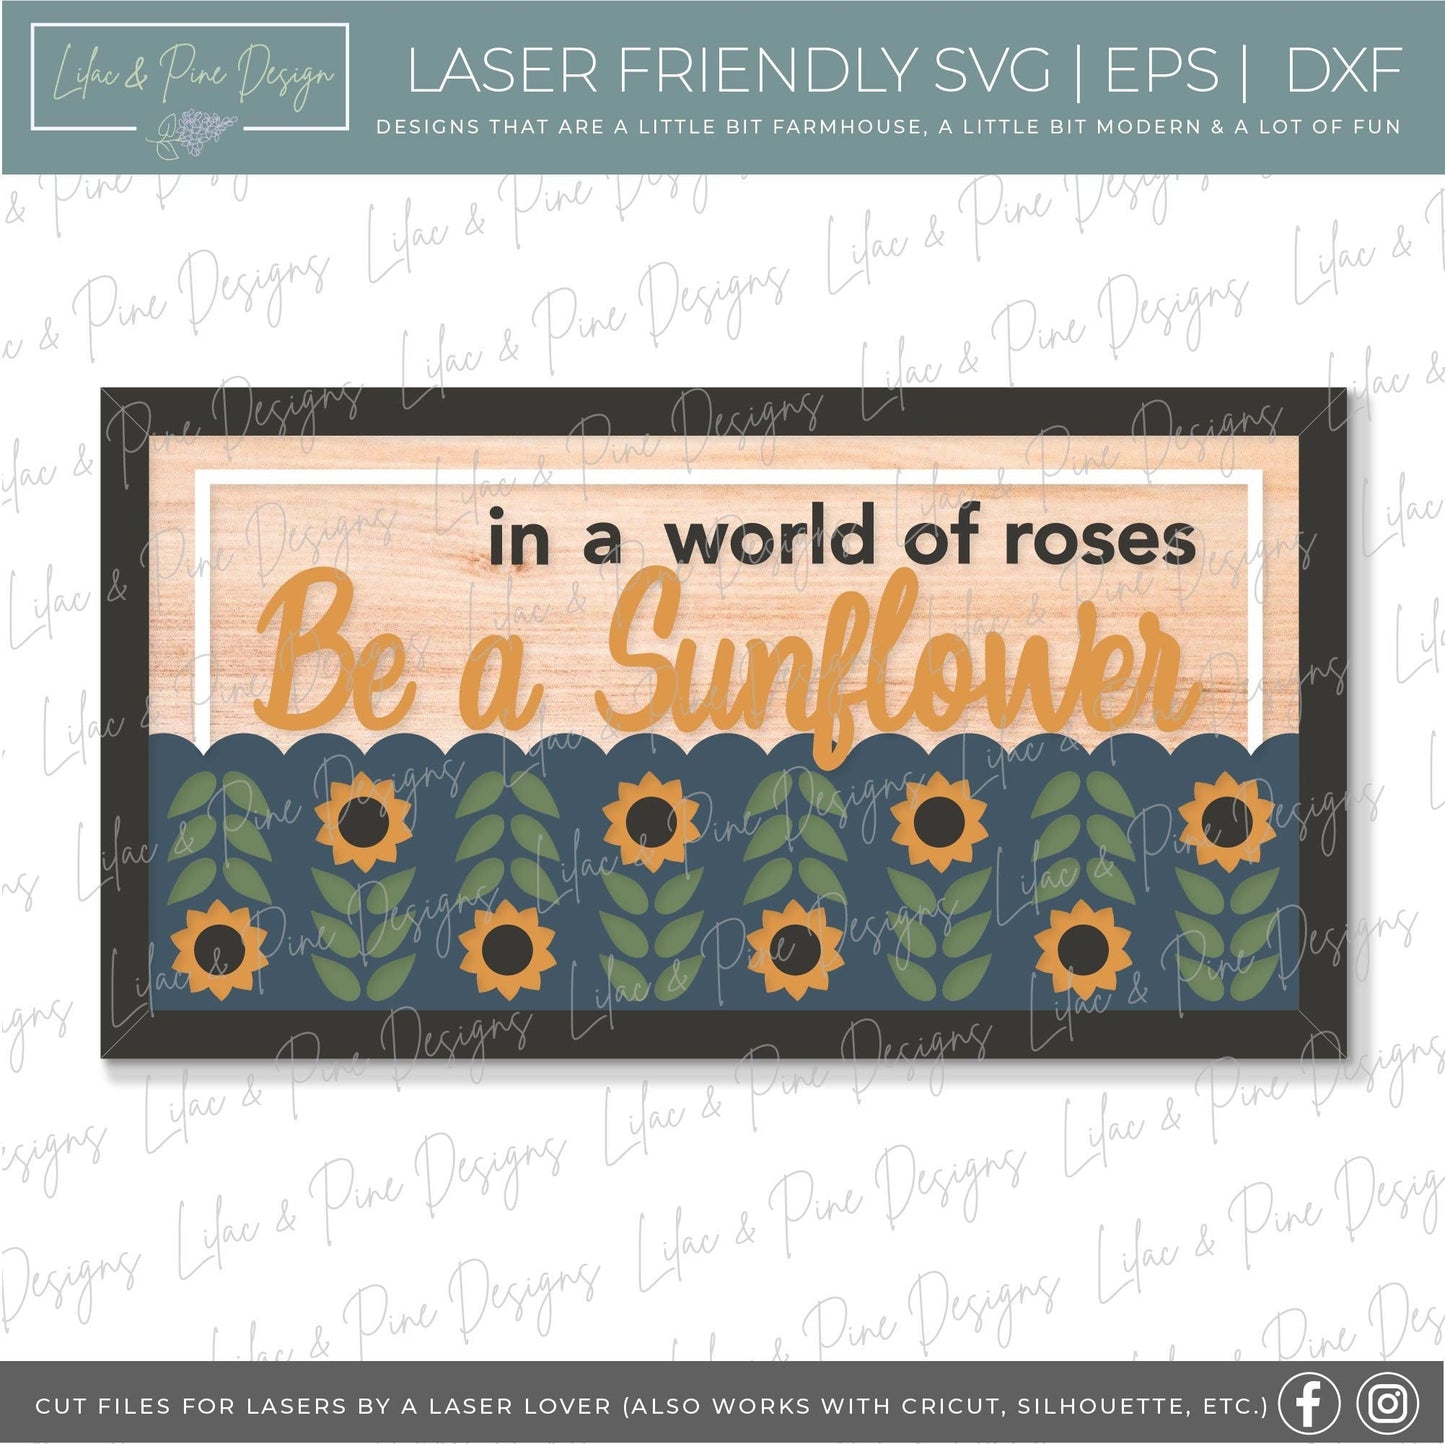 In a World of Roses be a Sunflower sign SVG, fall sign SVG, sunflower decor svg, sunflower quote svg, Glowforge SVG, laser cut file